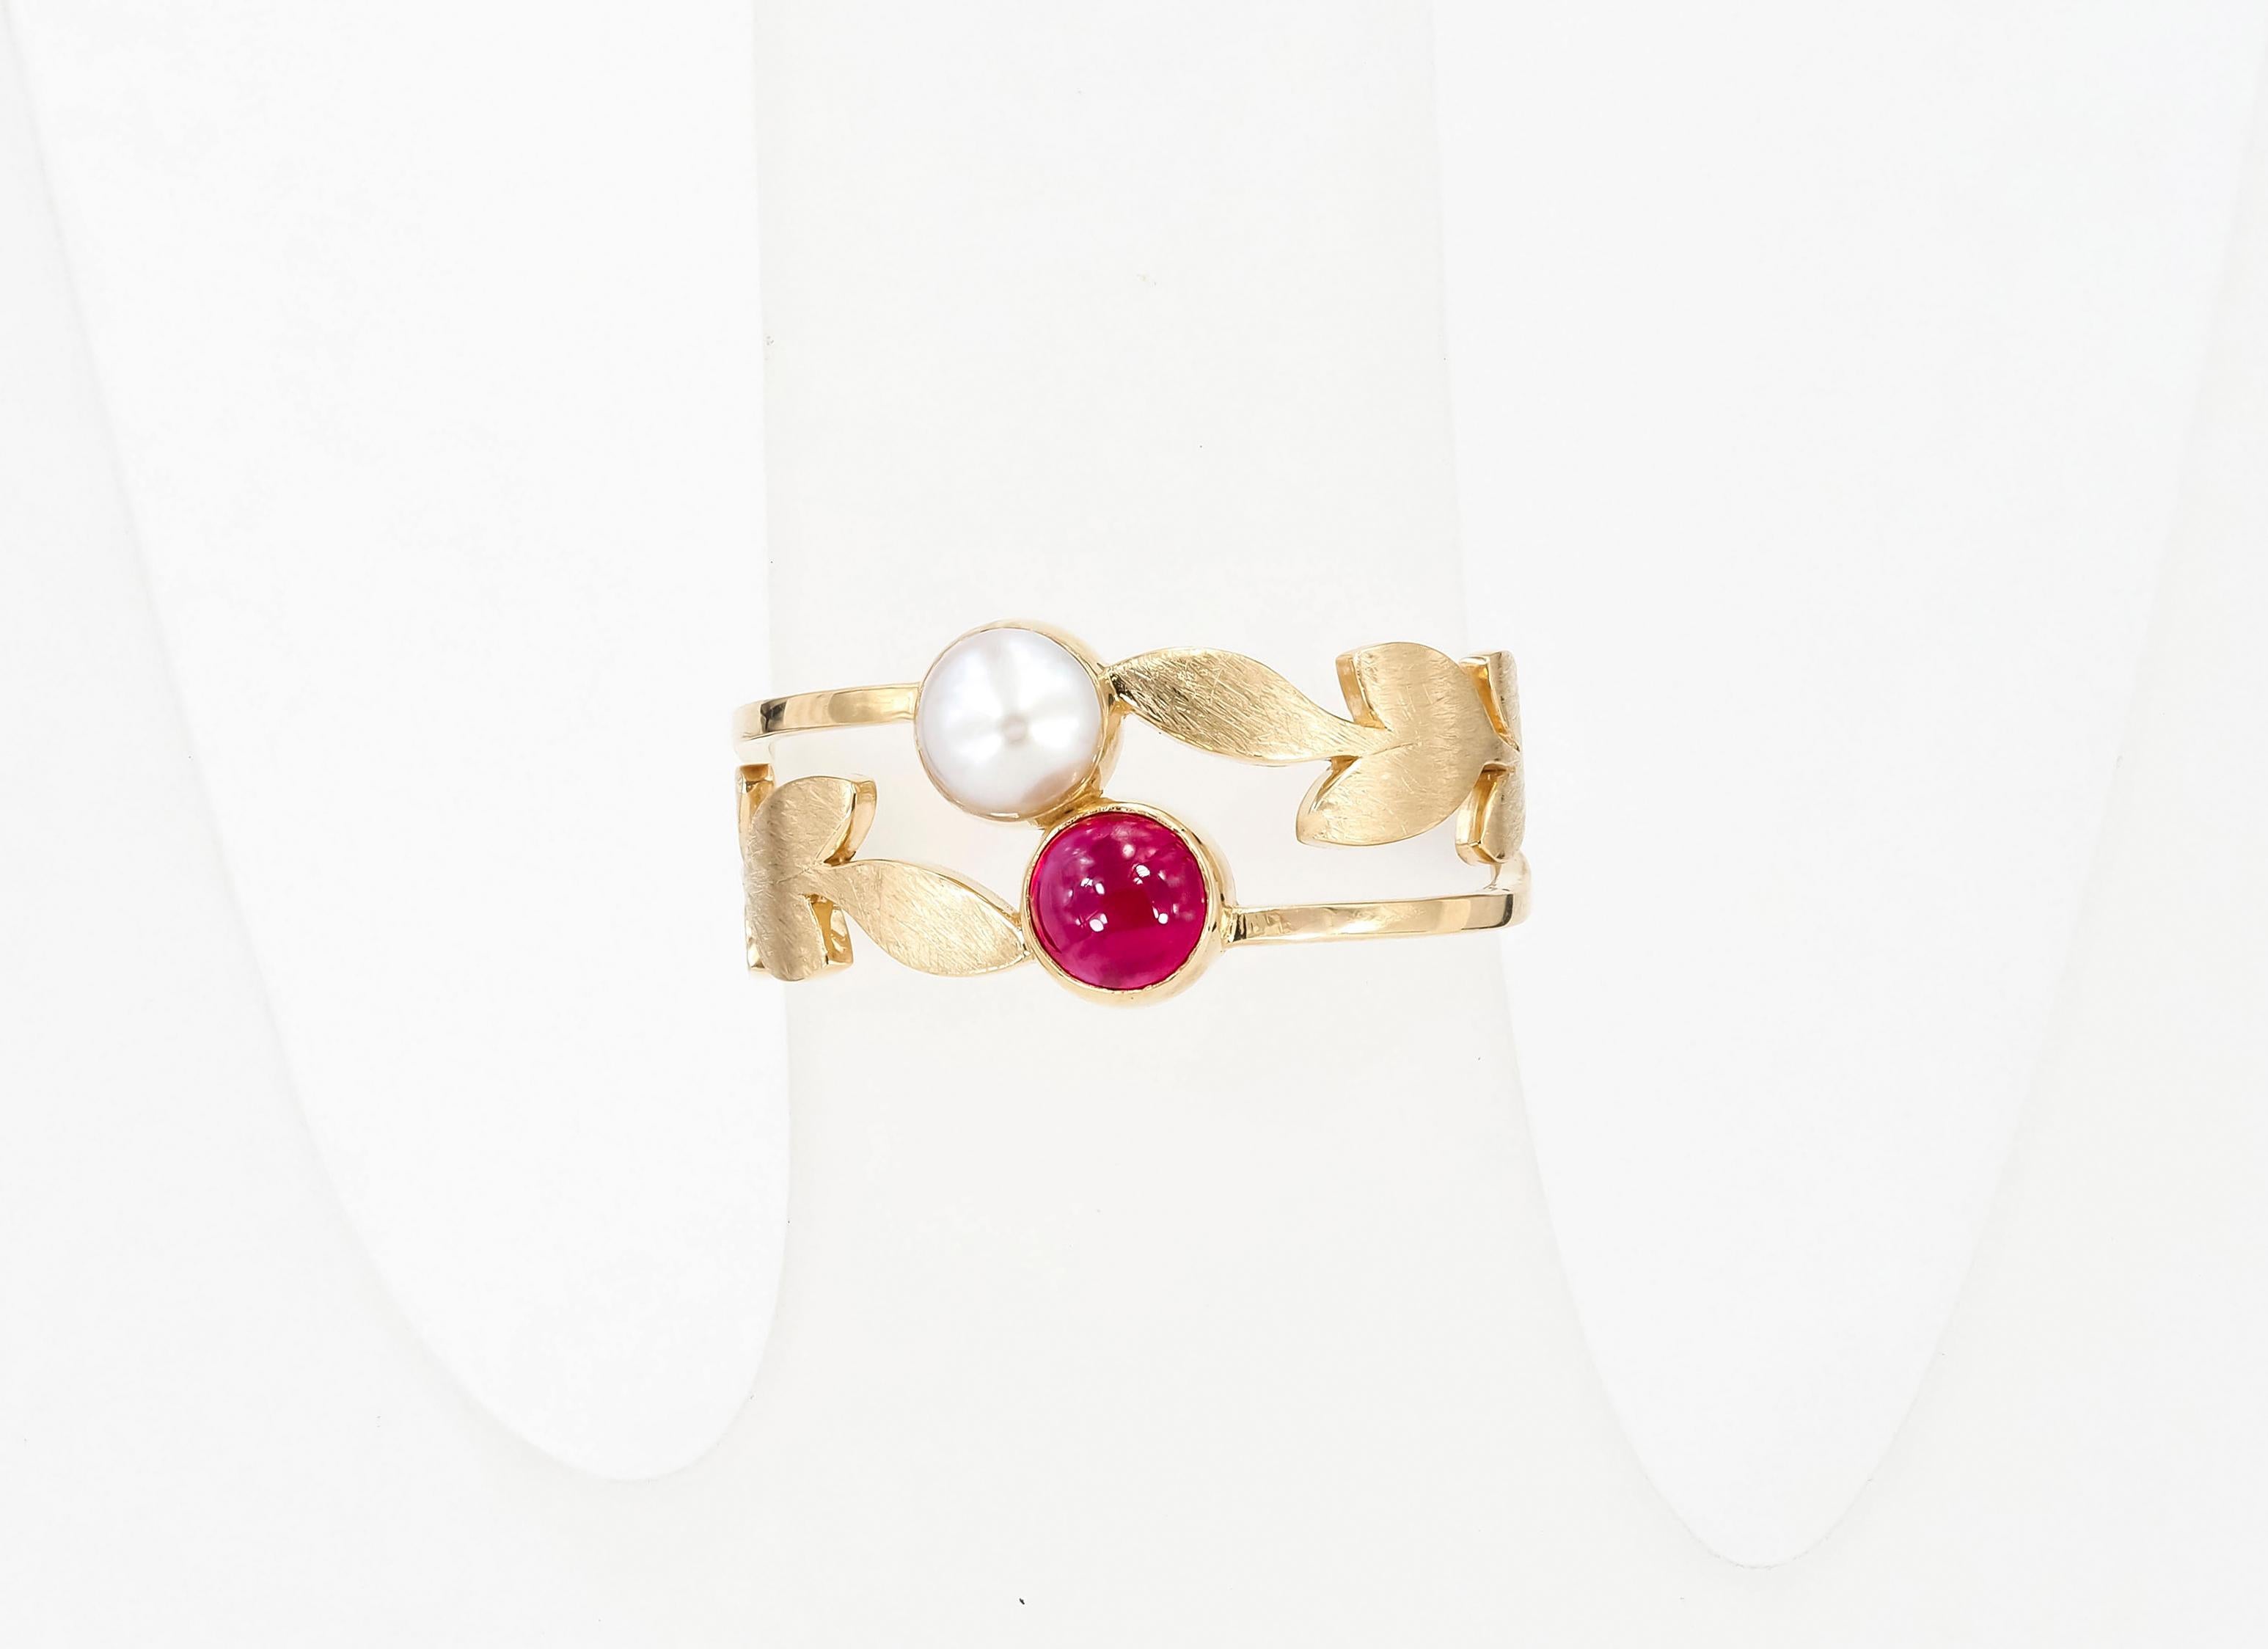 Cabochon Genuine ruby cabochon and pearl ring in 14k gold.  For Sale